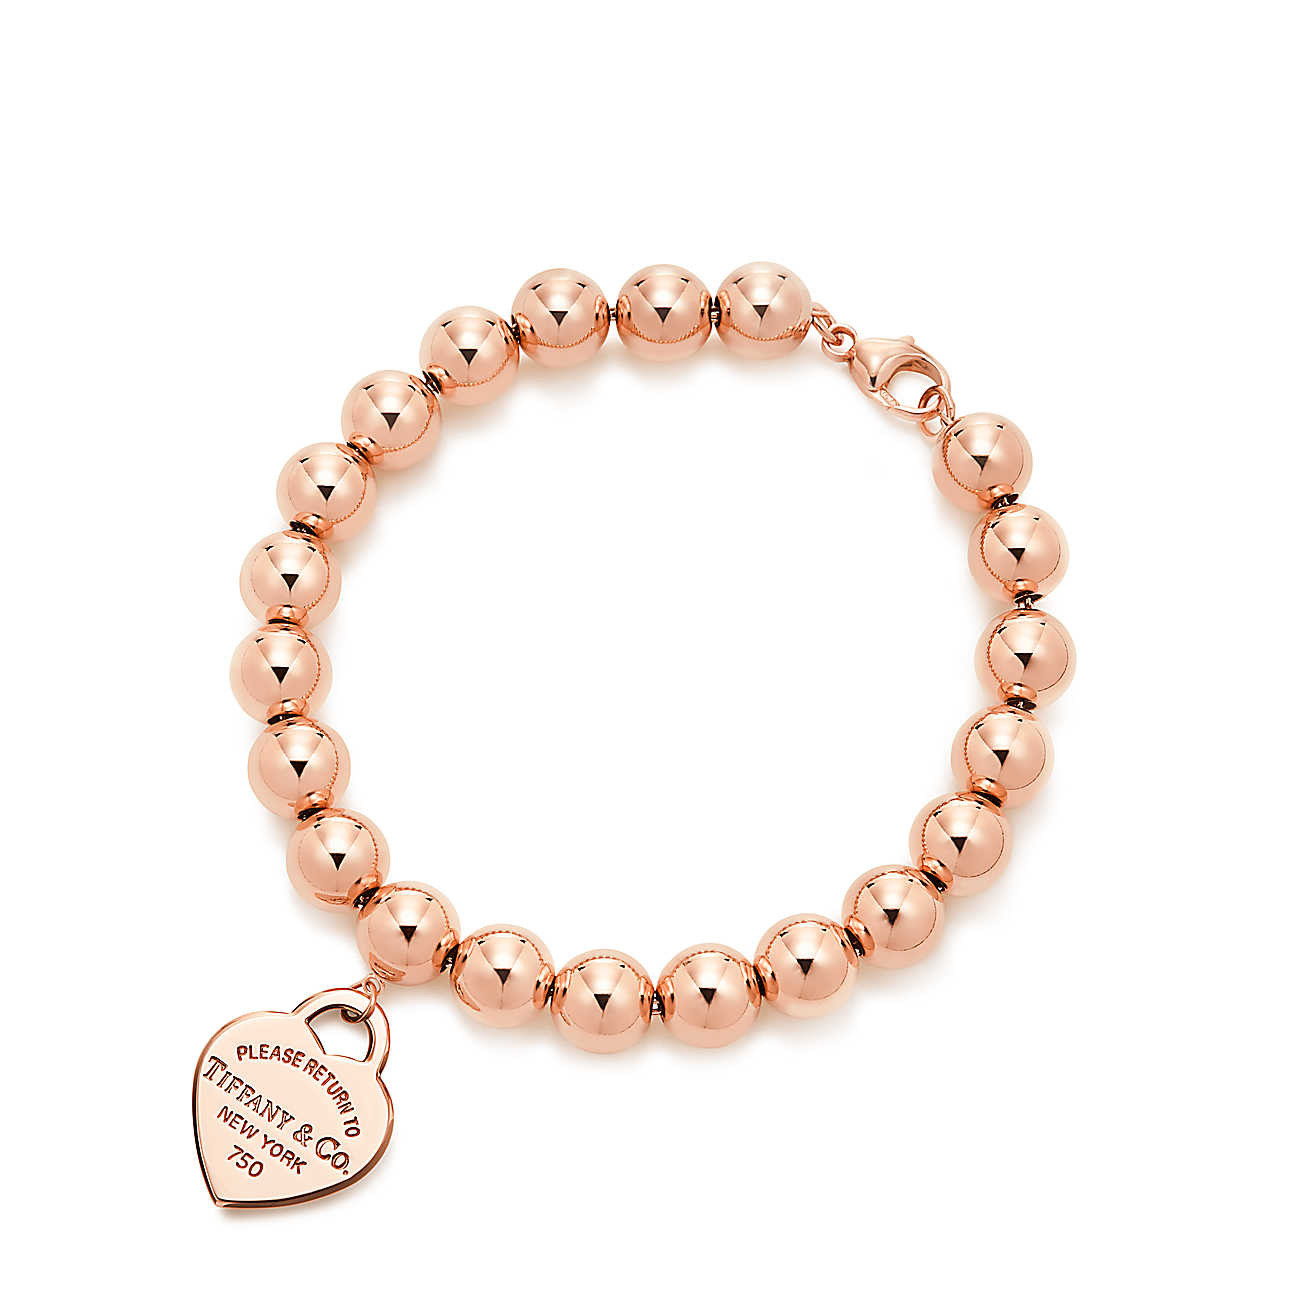 Tiffany Bead Bracelet
 Return to Tiffany small heart tag in 18k rose gold on a